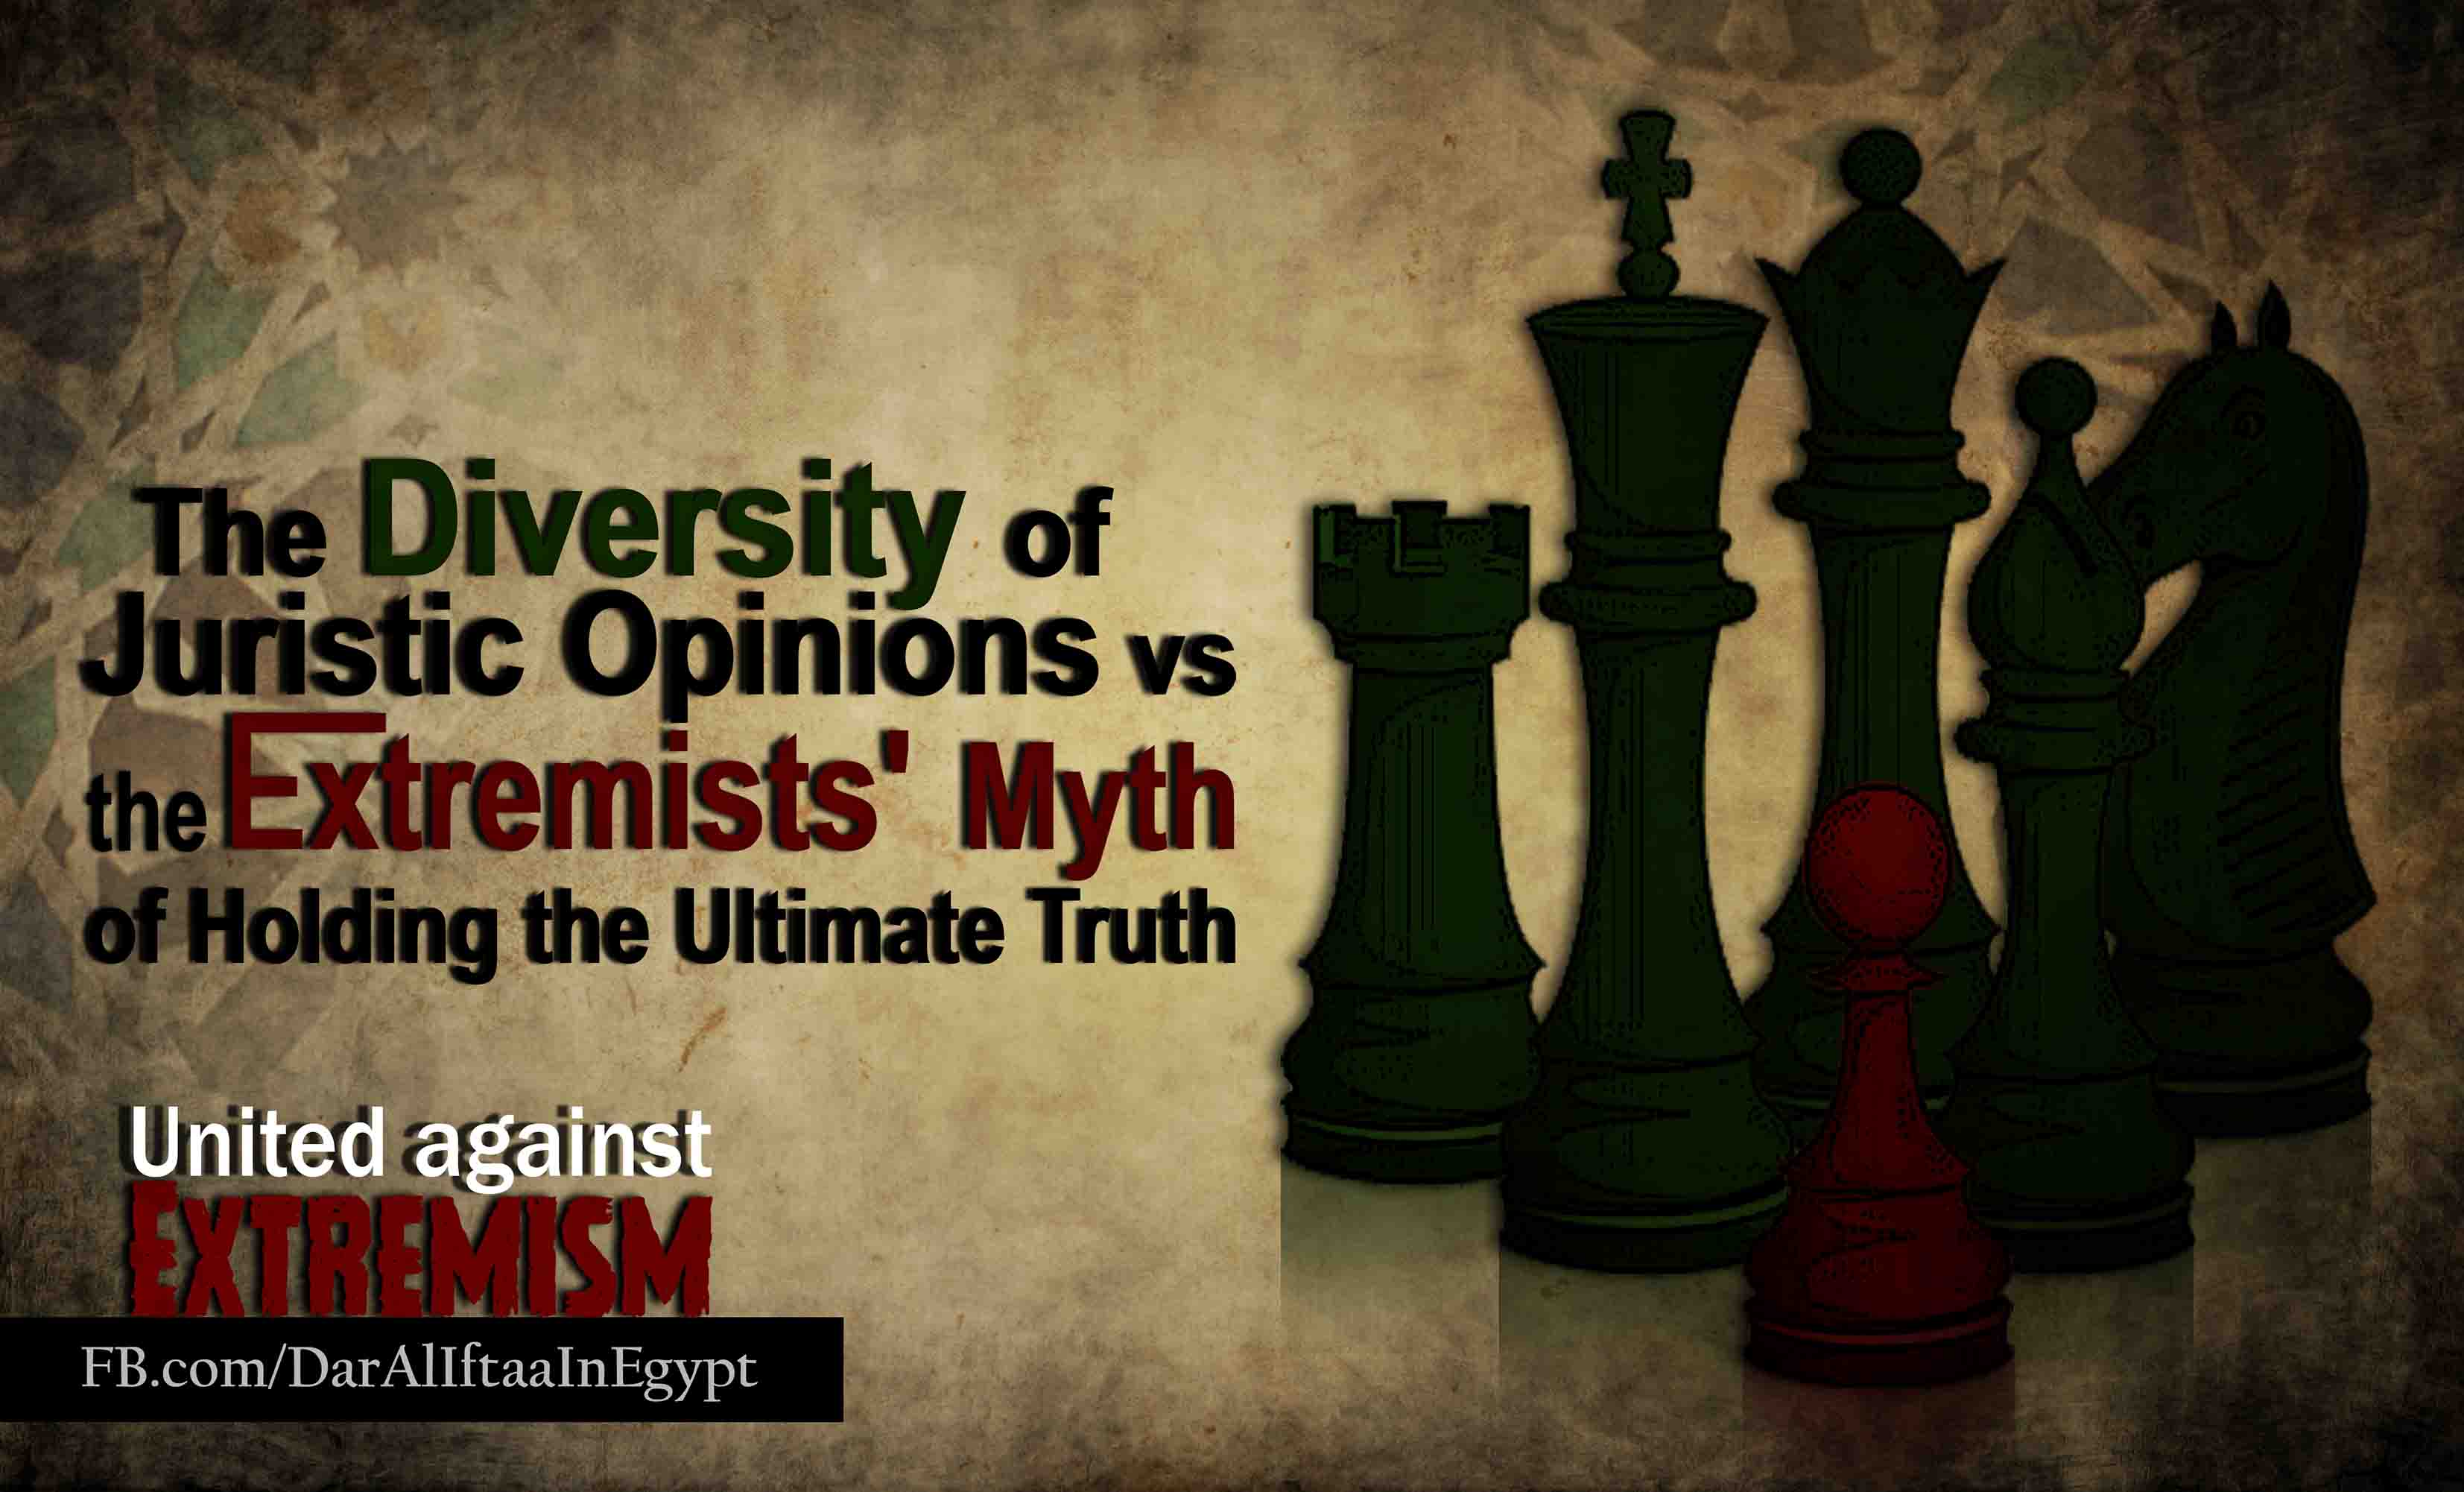 The Diversity of Juristic Opinions vs. the Extremists' Myth of Holding the Ultimate Truth